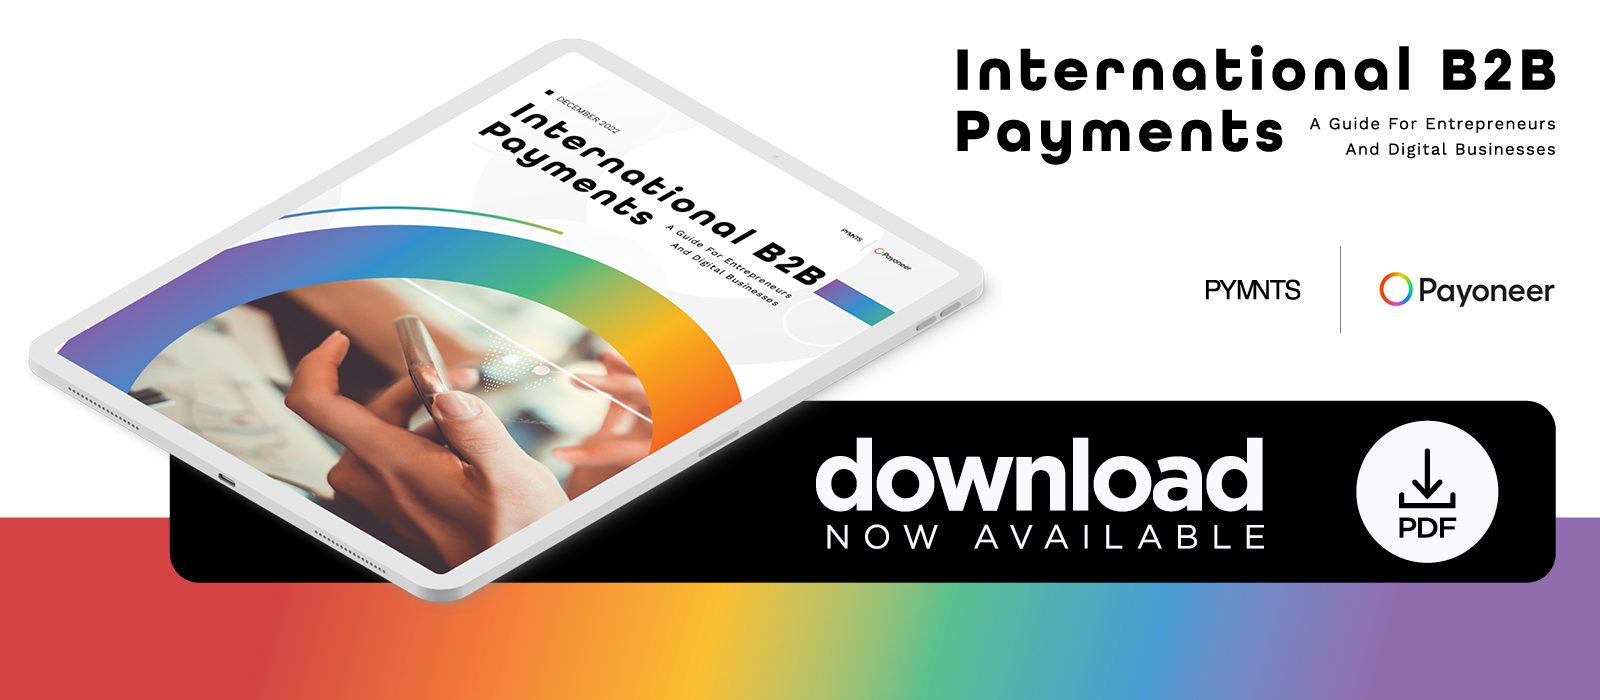 Payoneer - International B2B Payments: A Guide For Entrepreneurs And Digital Businesses - December 2022 - Learn more about how the right payments solution can help businesses expand internationally